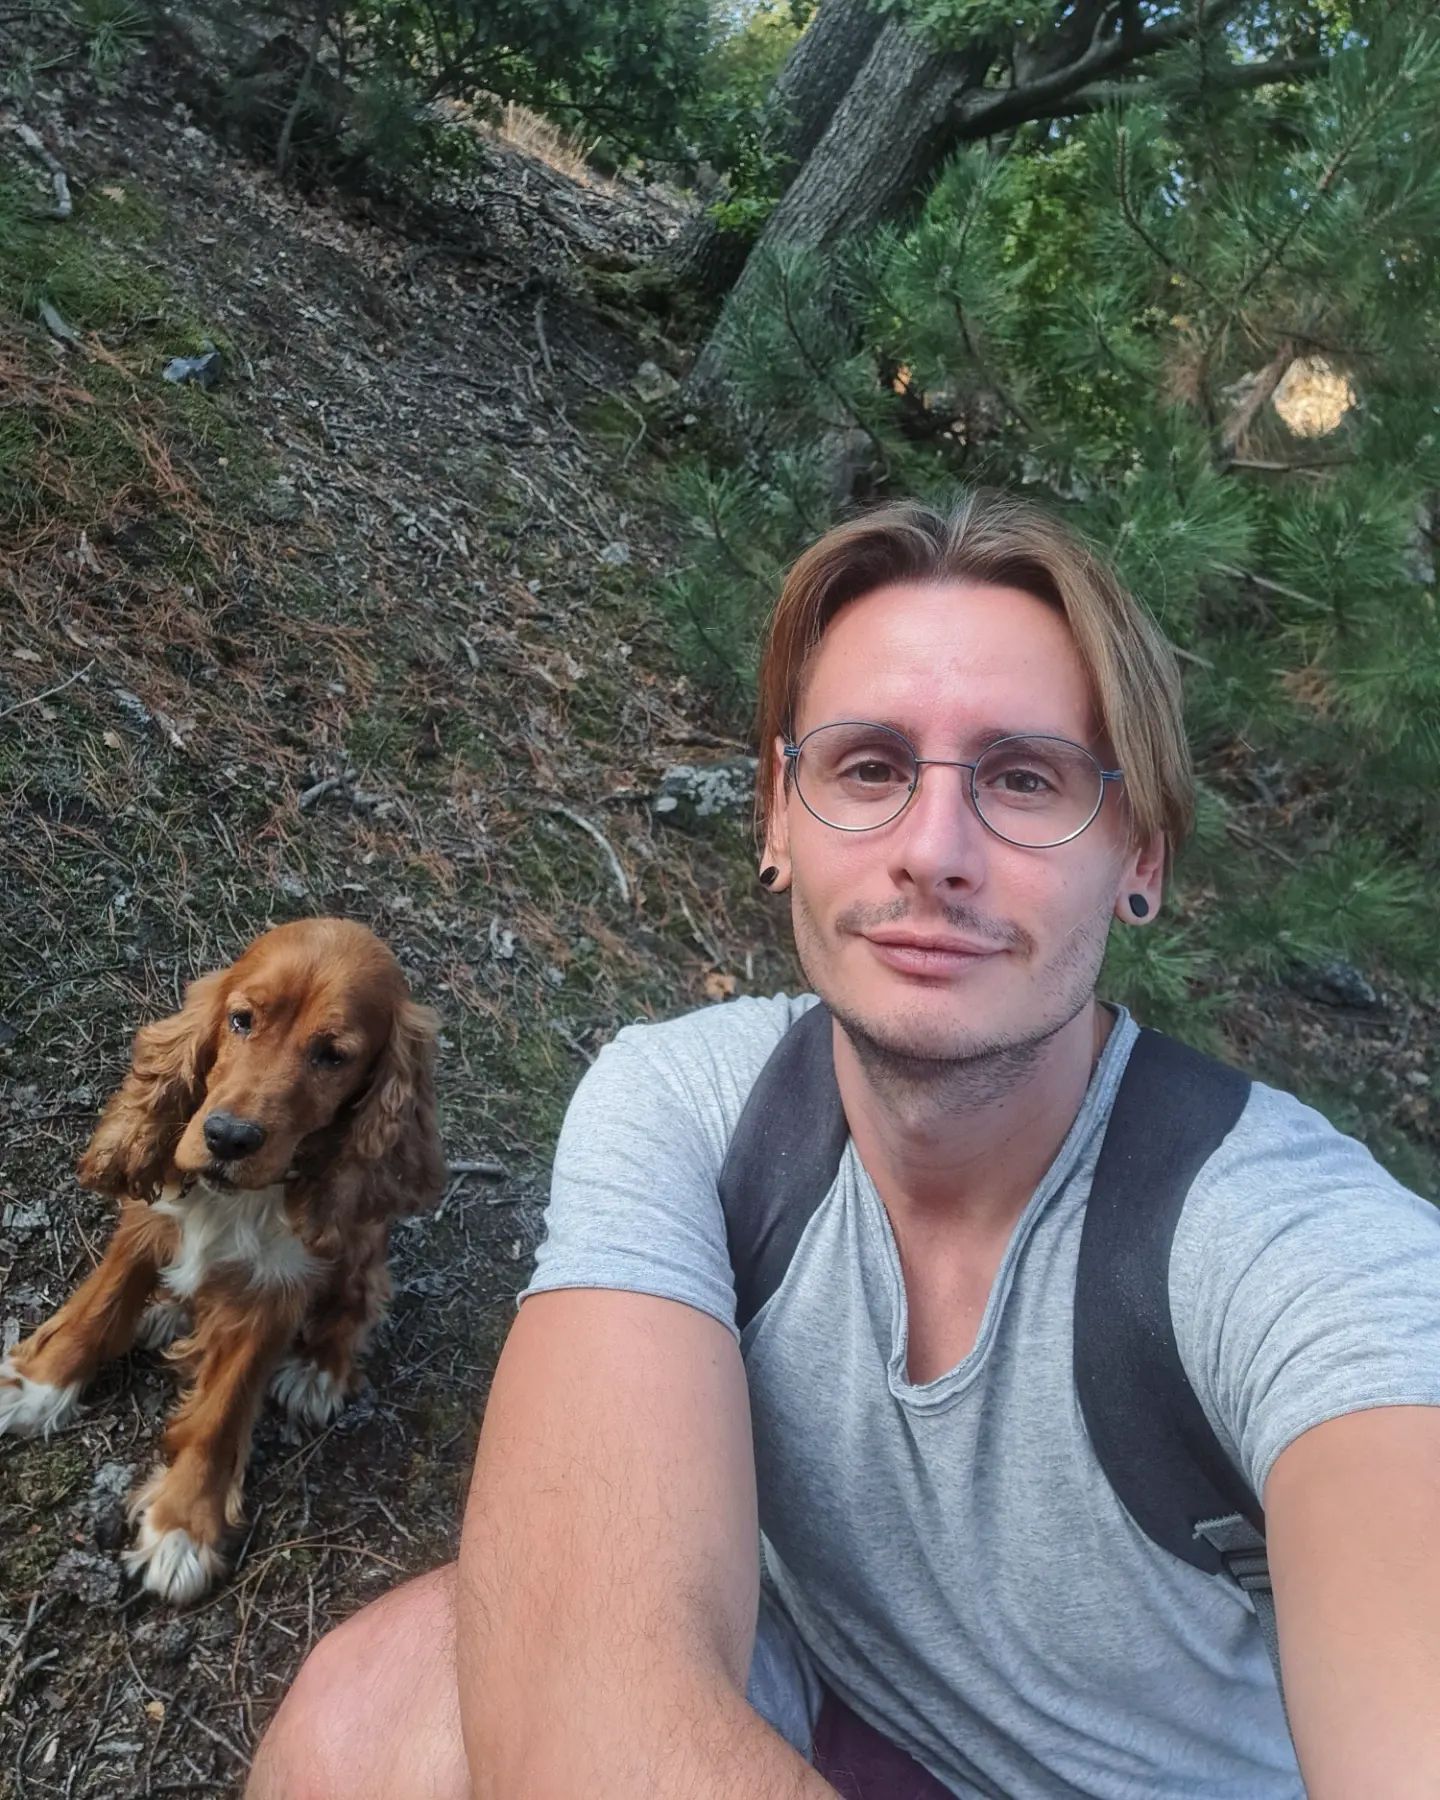 My beloved monster and me
We go everywhere together
❤️
.
.
. #lovenature #dogs #pets #nature #photooftheday #instanature #instadogs #bestfriend #cute #outdoors